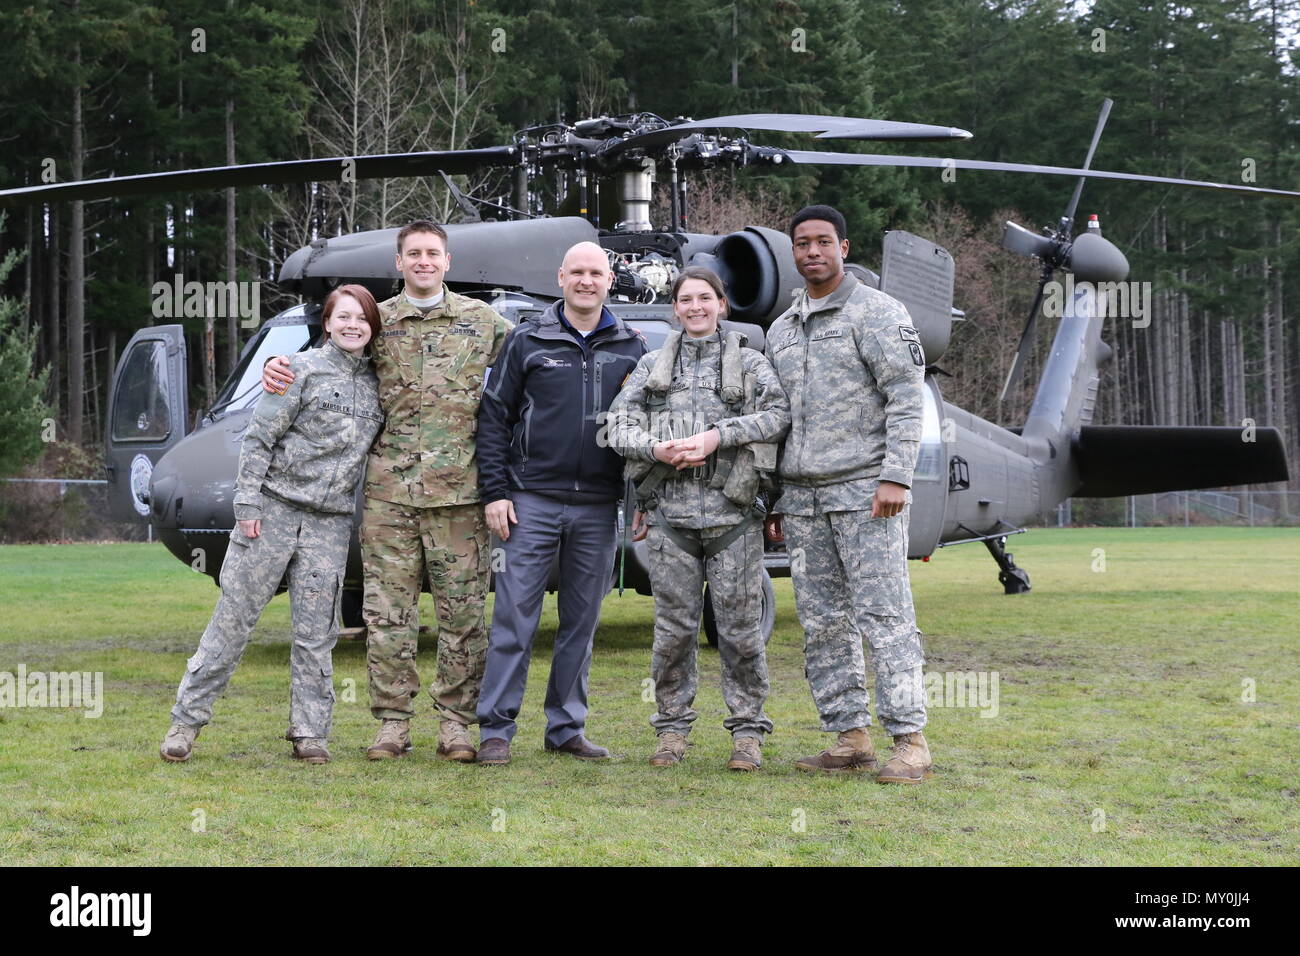 Specialist Melissa Marsolek, 1st Lt. Scott Darragh, Specialist Keely Killebrew, and Chief Warrant Officer 2 Sean Quillin, all from Charlie Company, 1st Battalion, 140th Aviation Regiment, pose for a photo with Jeff Coleman (center), aviation instructor at Emerald Ridge High School, Puyallup, Washington in front of their UH-60 Black Hawk helicopter. The visit to the high school was part of a partnership with the school's aviation program which gives aspiring pilots the chance to talk to real pilots and sit in real helicopters. Courtesy photo by Jennifer Picardo. Stock Photo